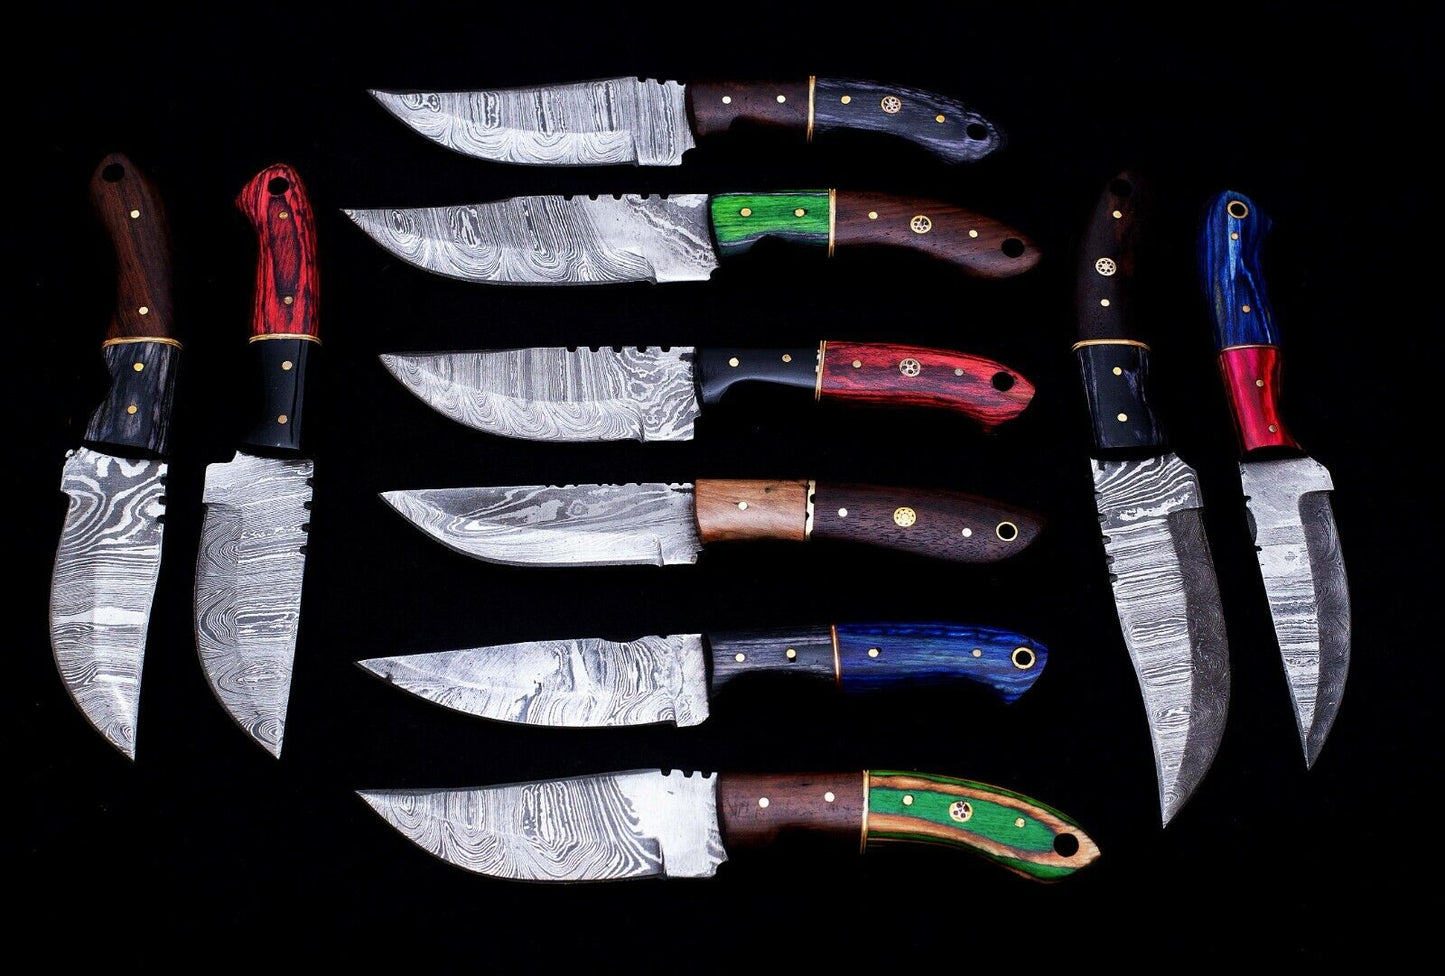 10 pieces Damascus steel Round scale skinning knives set with Leather sheath. Overall 85 inches long Damascus steel blade knives